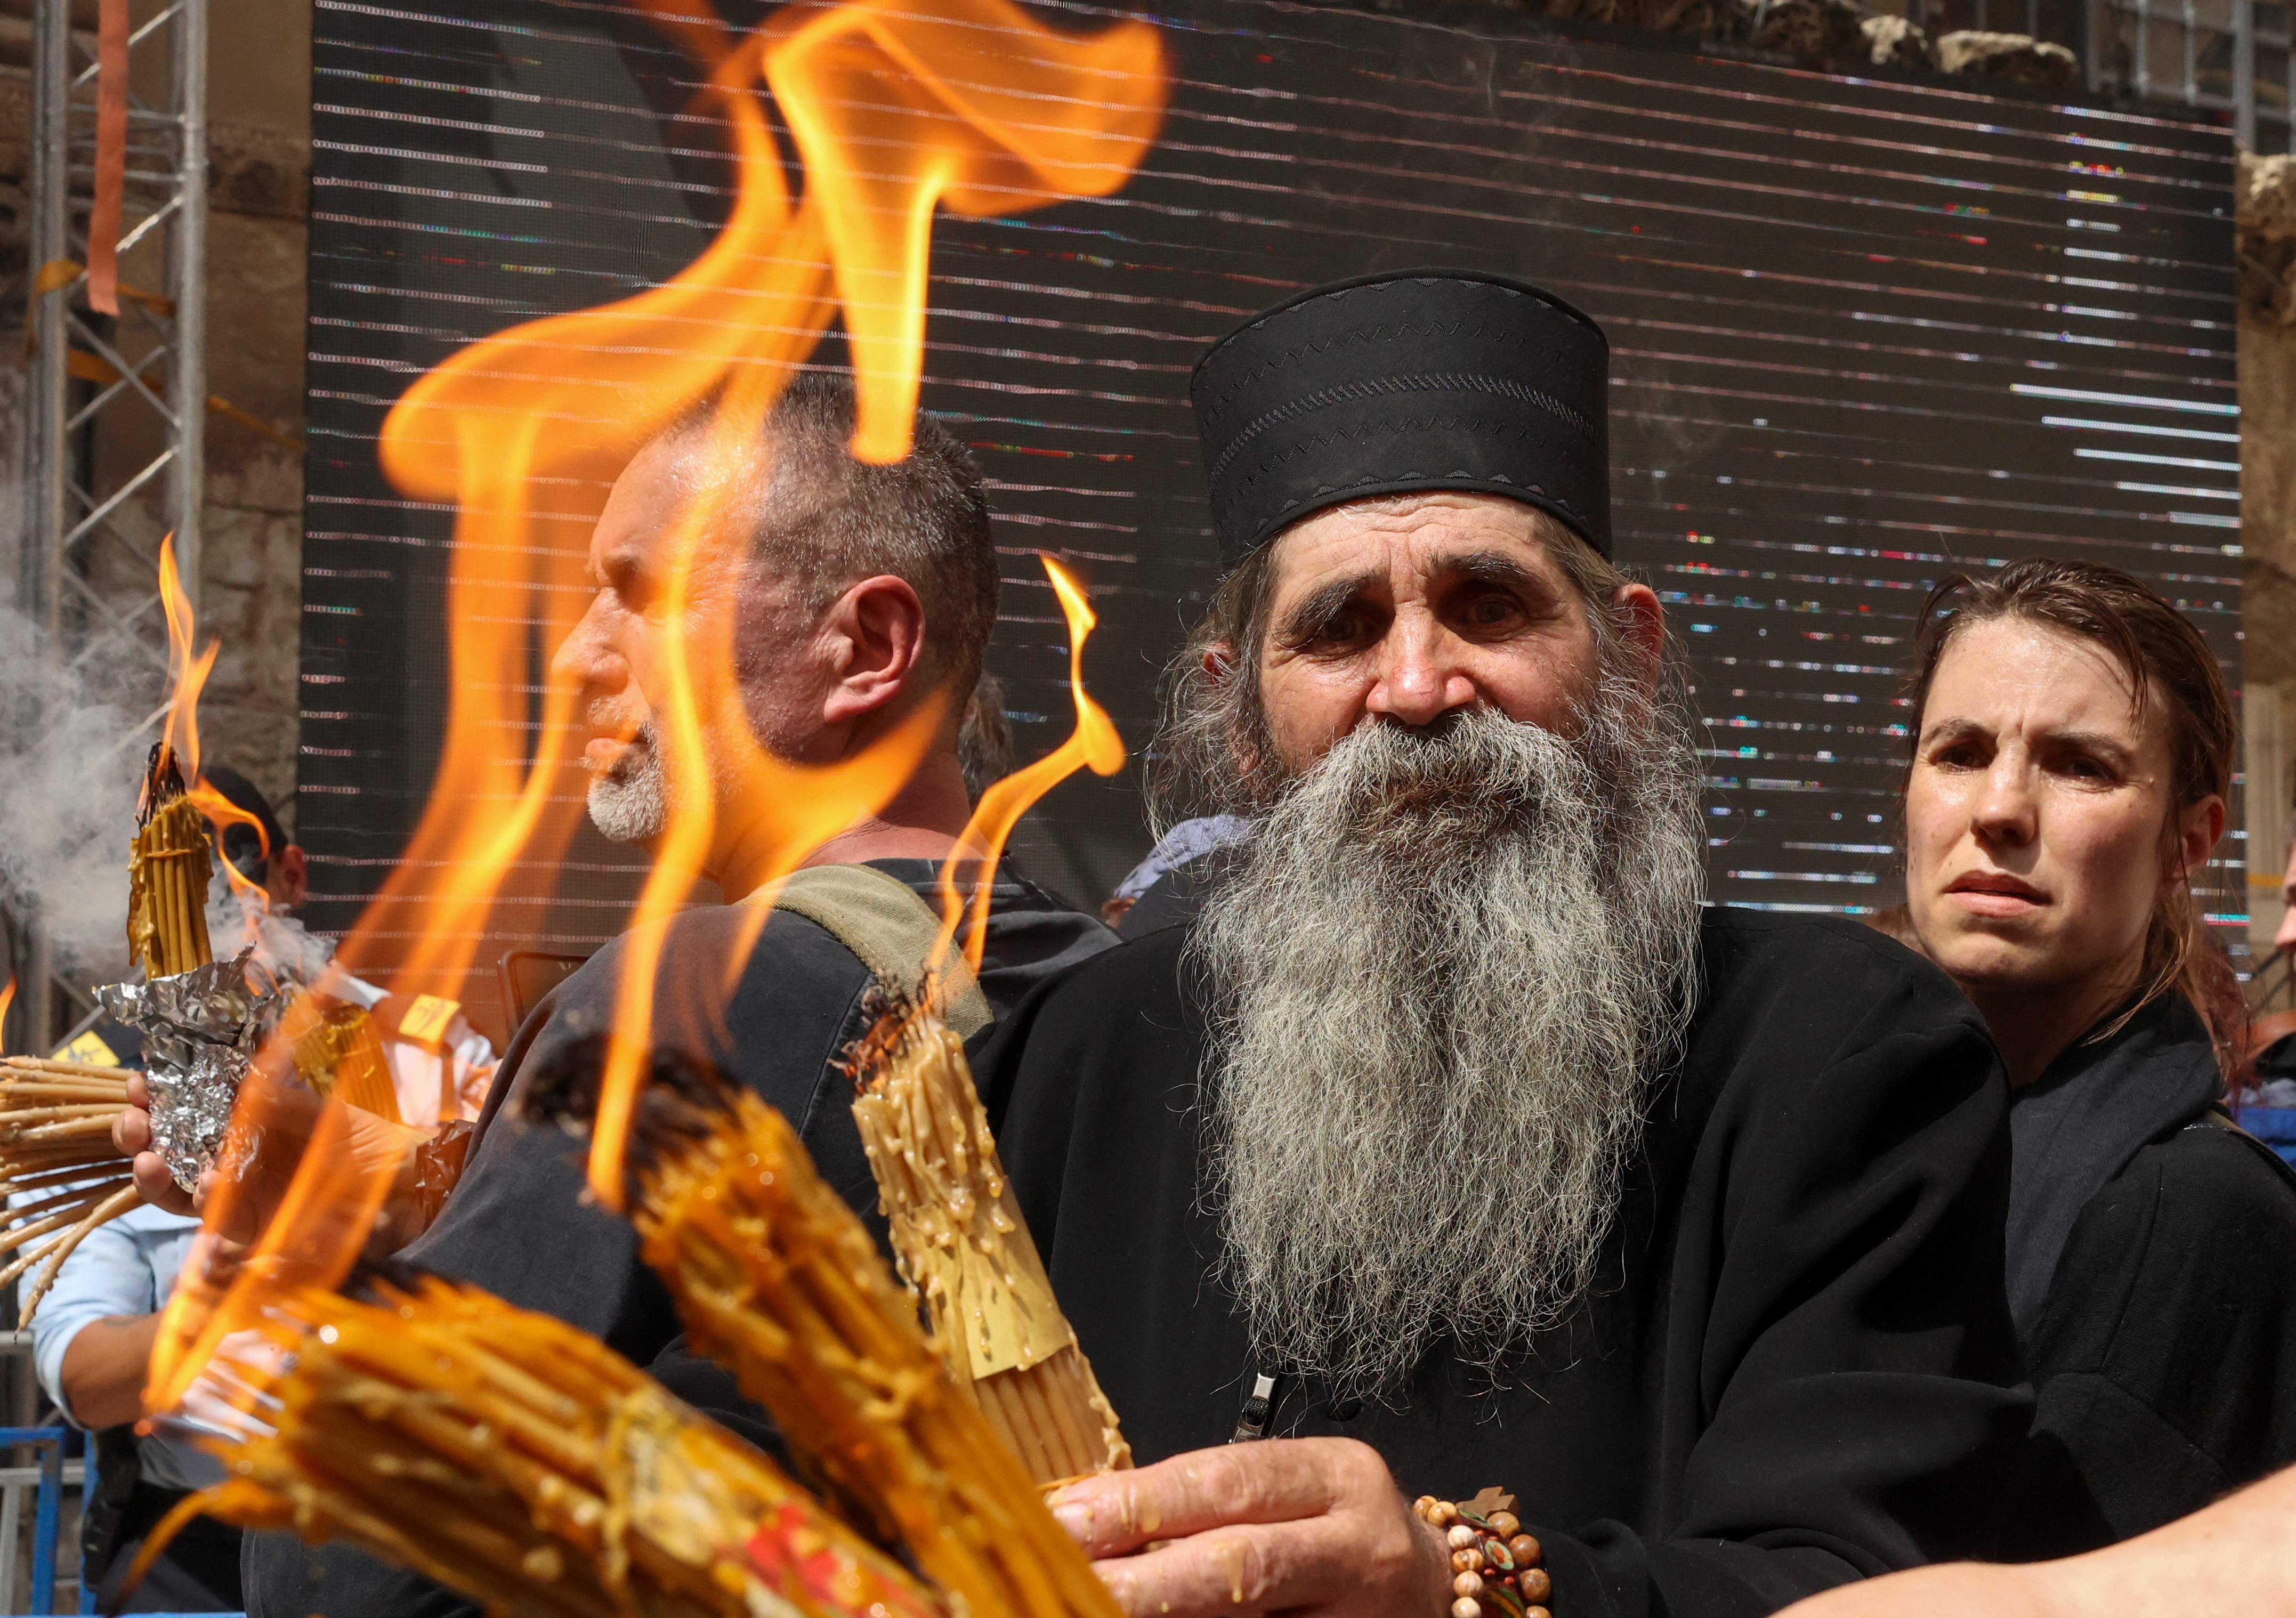 Israeli restrictions on 'holy fire' spark Christian outrage